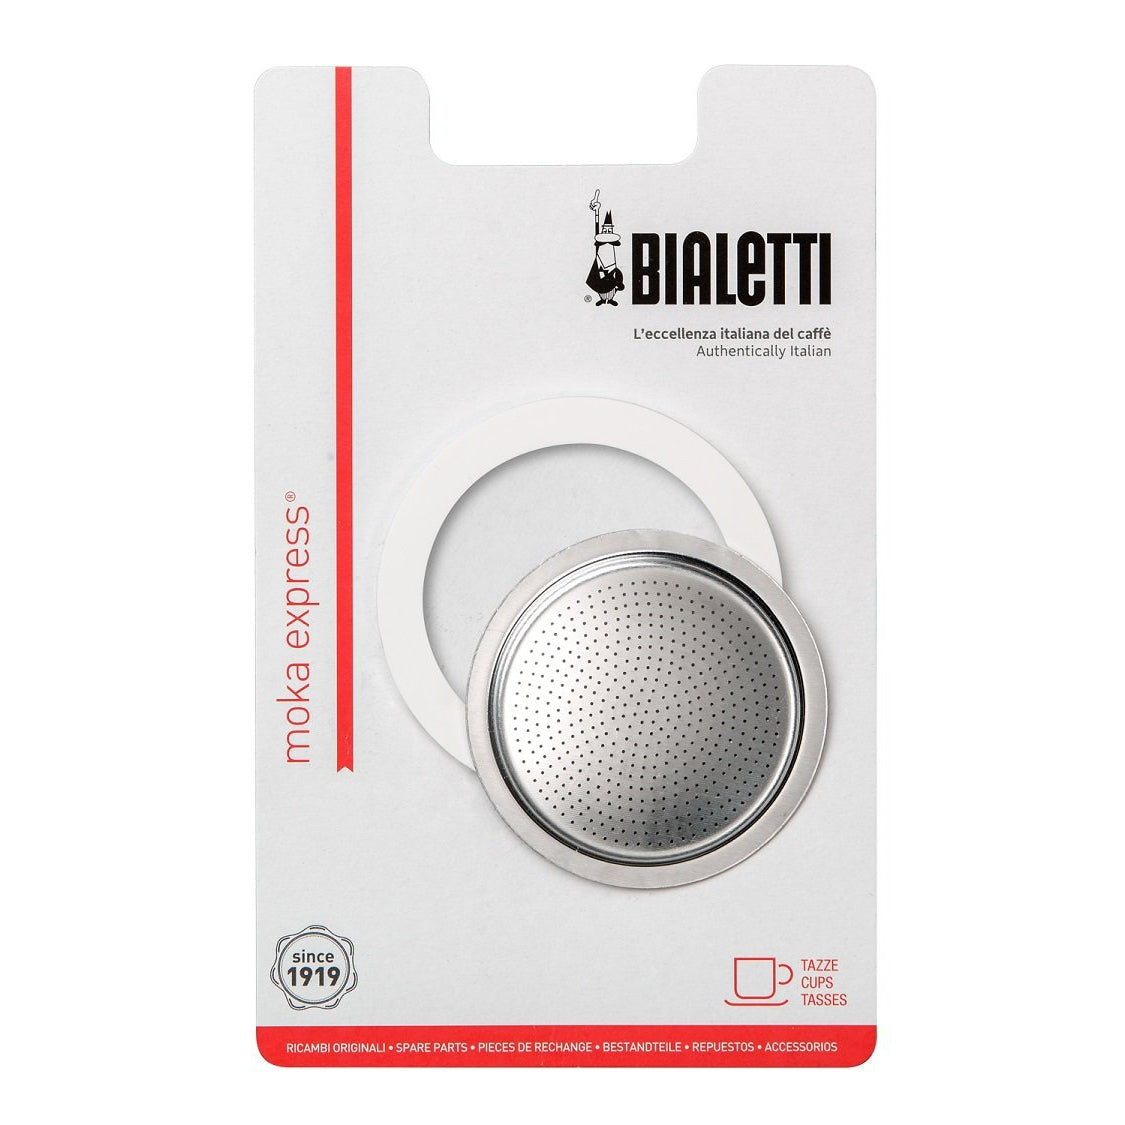 Bialetti 1 Ring / 1 Filter Pack